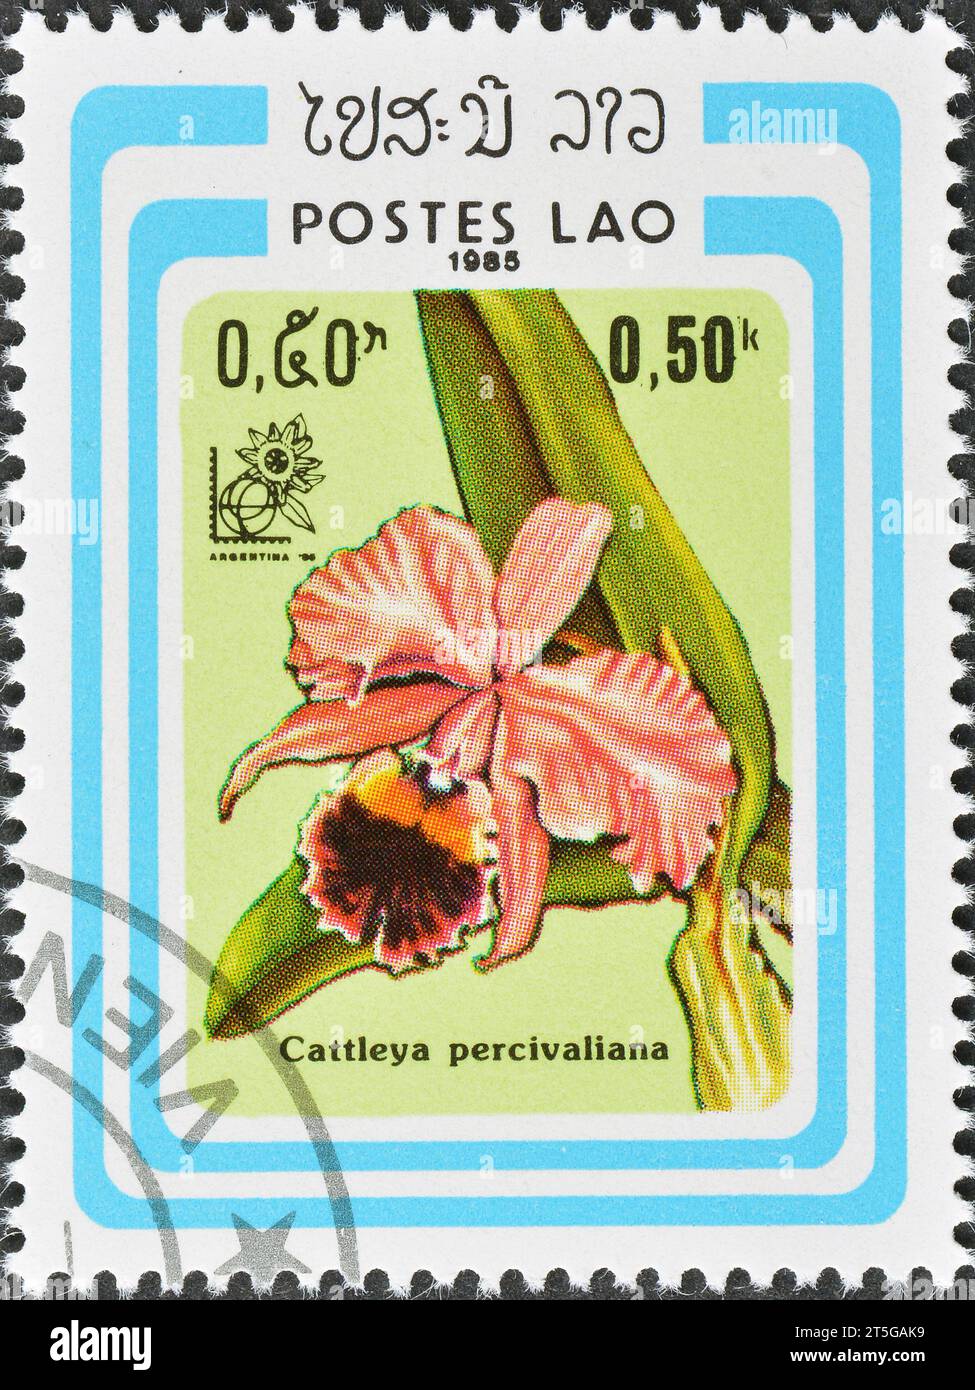 Cancelled postage stamp printed by Laos, that shows Cattleya percivaliana,  International Stamp Exhibition Argentina, circa 1985. Stock Photo